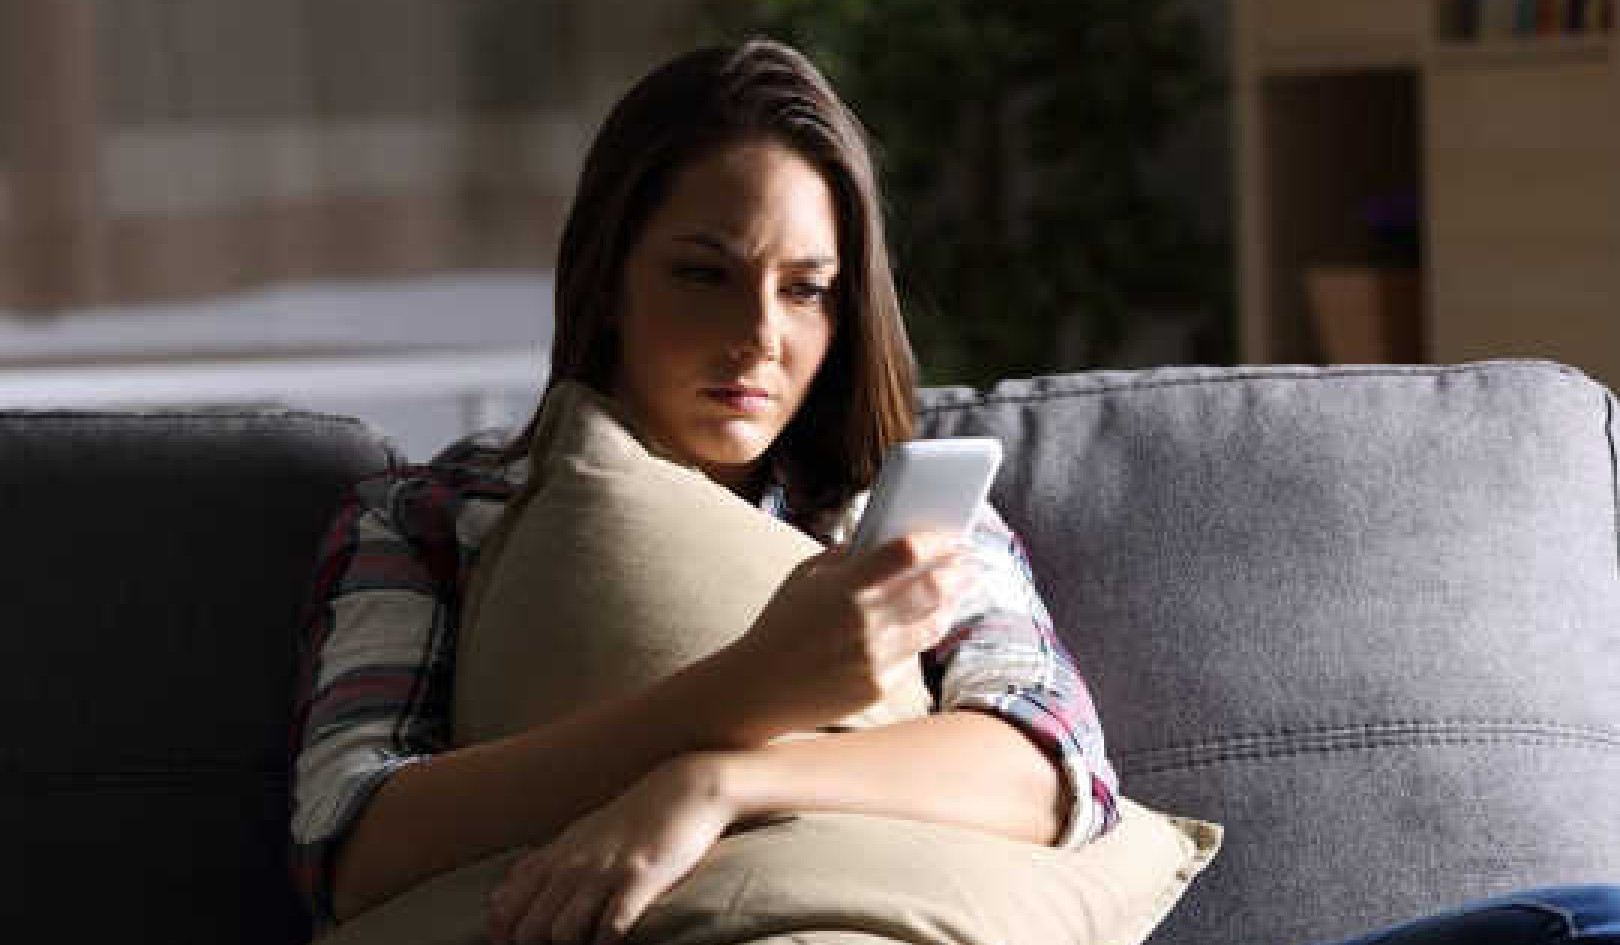 Bereaved Who Take Comfort In Digital Messages From Dead Loved Ones Live In Fear Of Losing Them